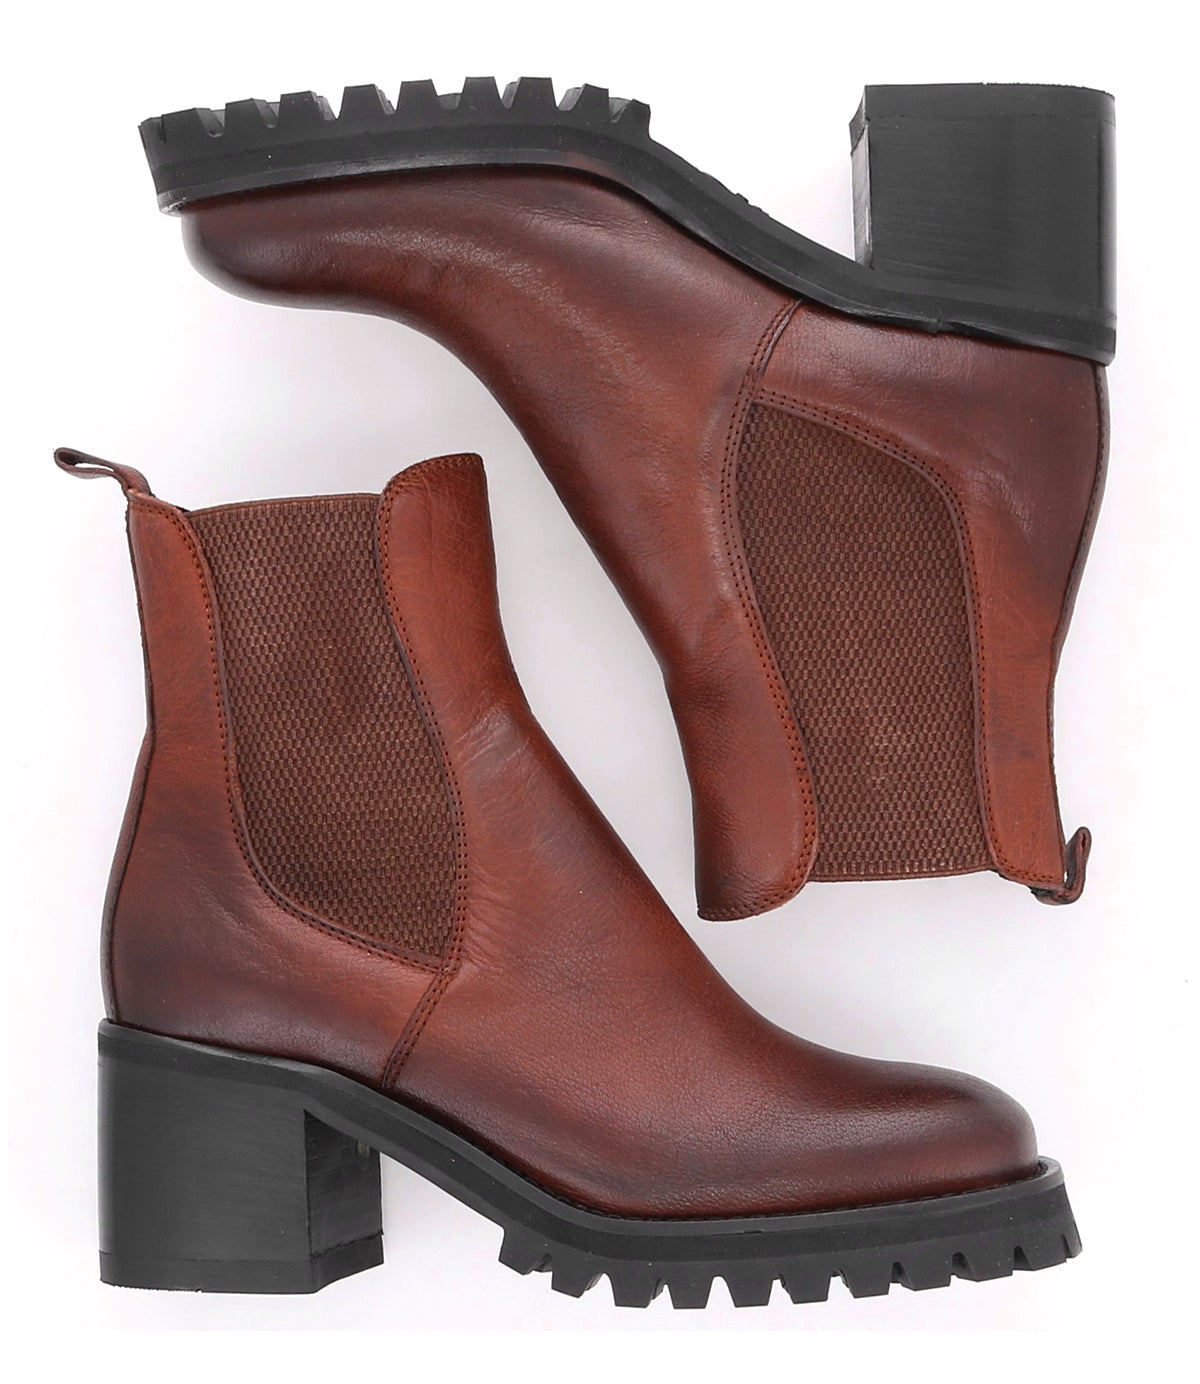 Surge Chelsea boots in brown Italian leather by Bed Stu.